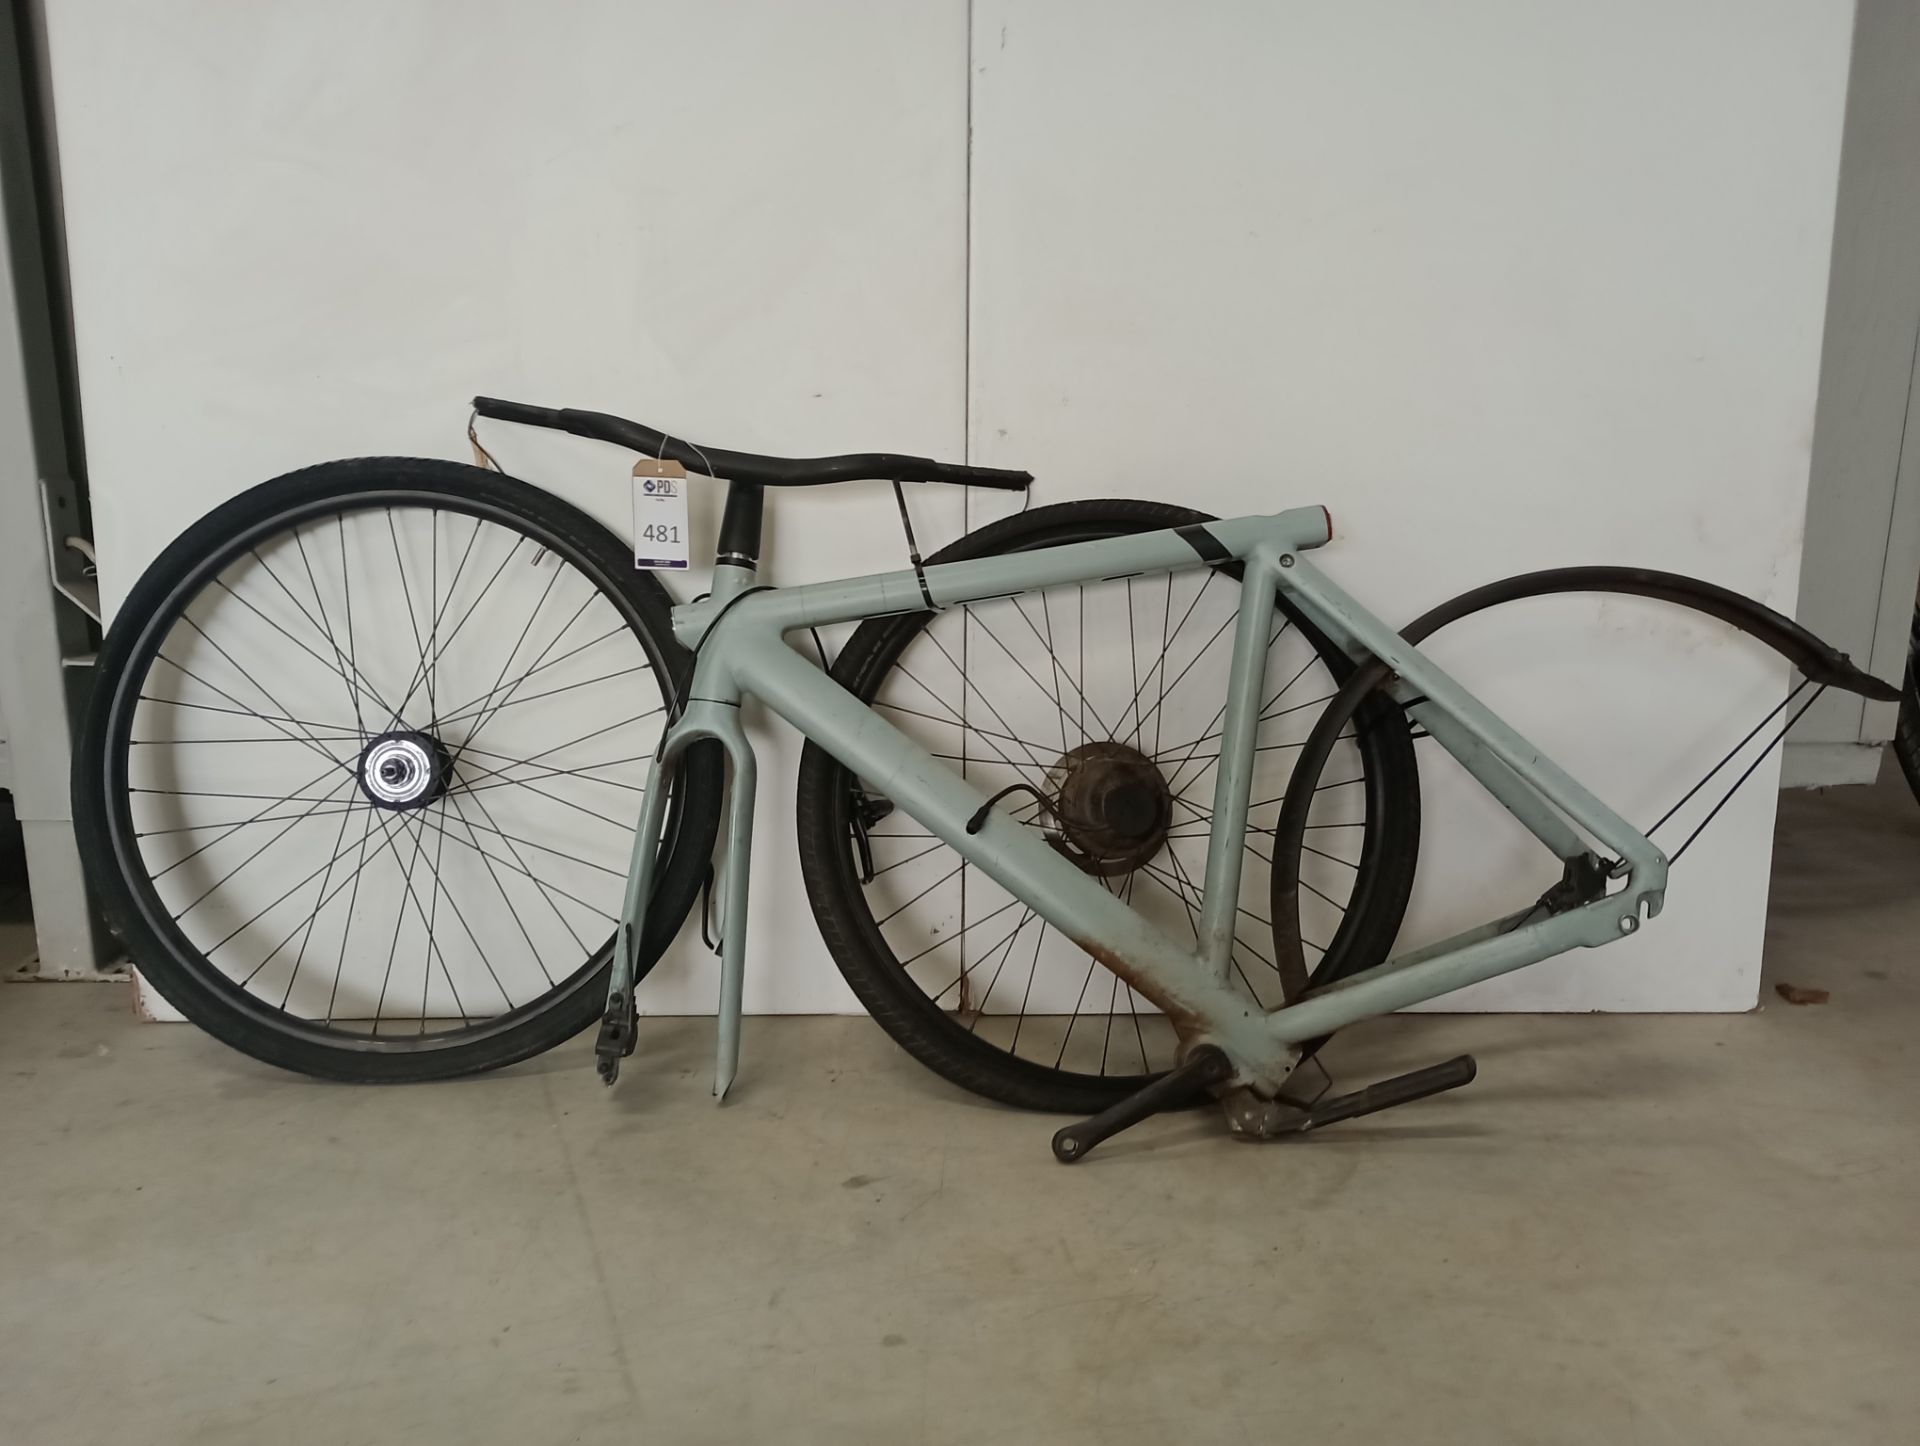 VanMoof S3 Electric Bike, Frame Number ASY1032620 (NOT ROADWORTHY - FOR SPARES ONLY) (No codes